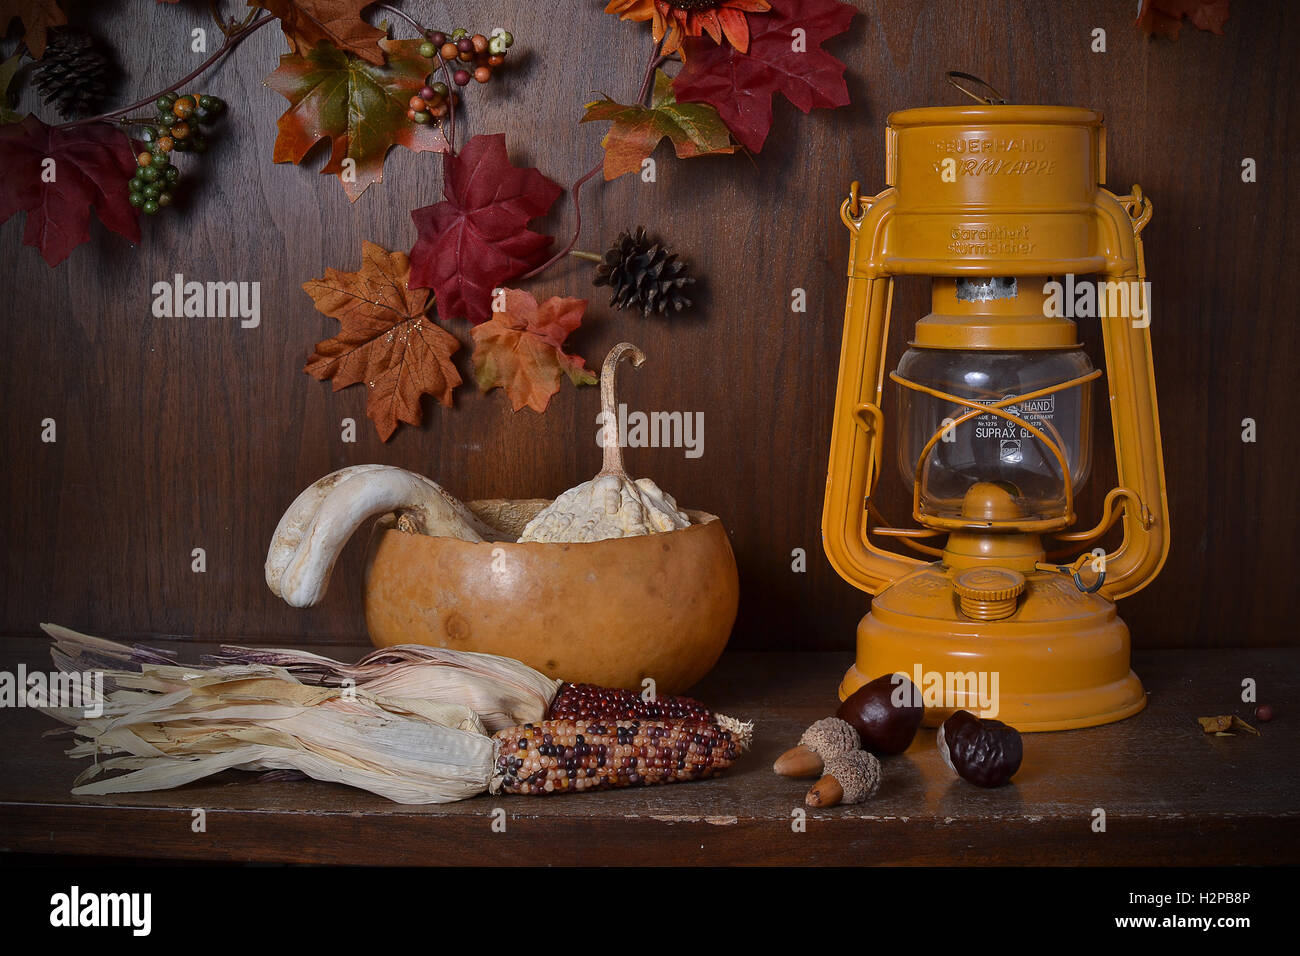 Abstract still life displaying dead, dried harvest symbols and a German gas lantern, against wooden background Stock Photo